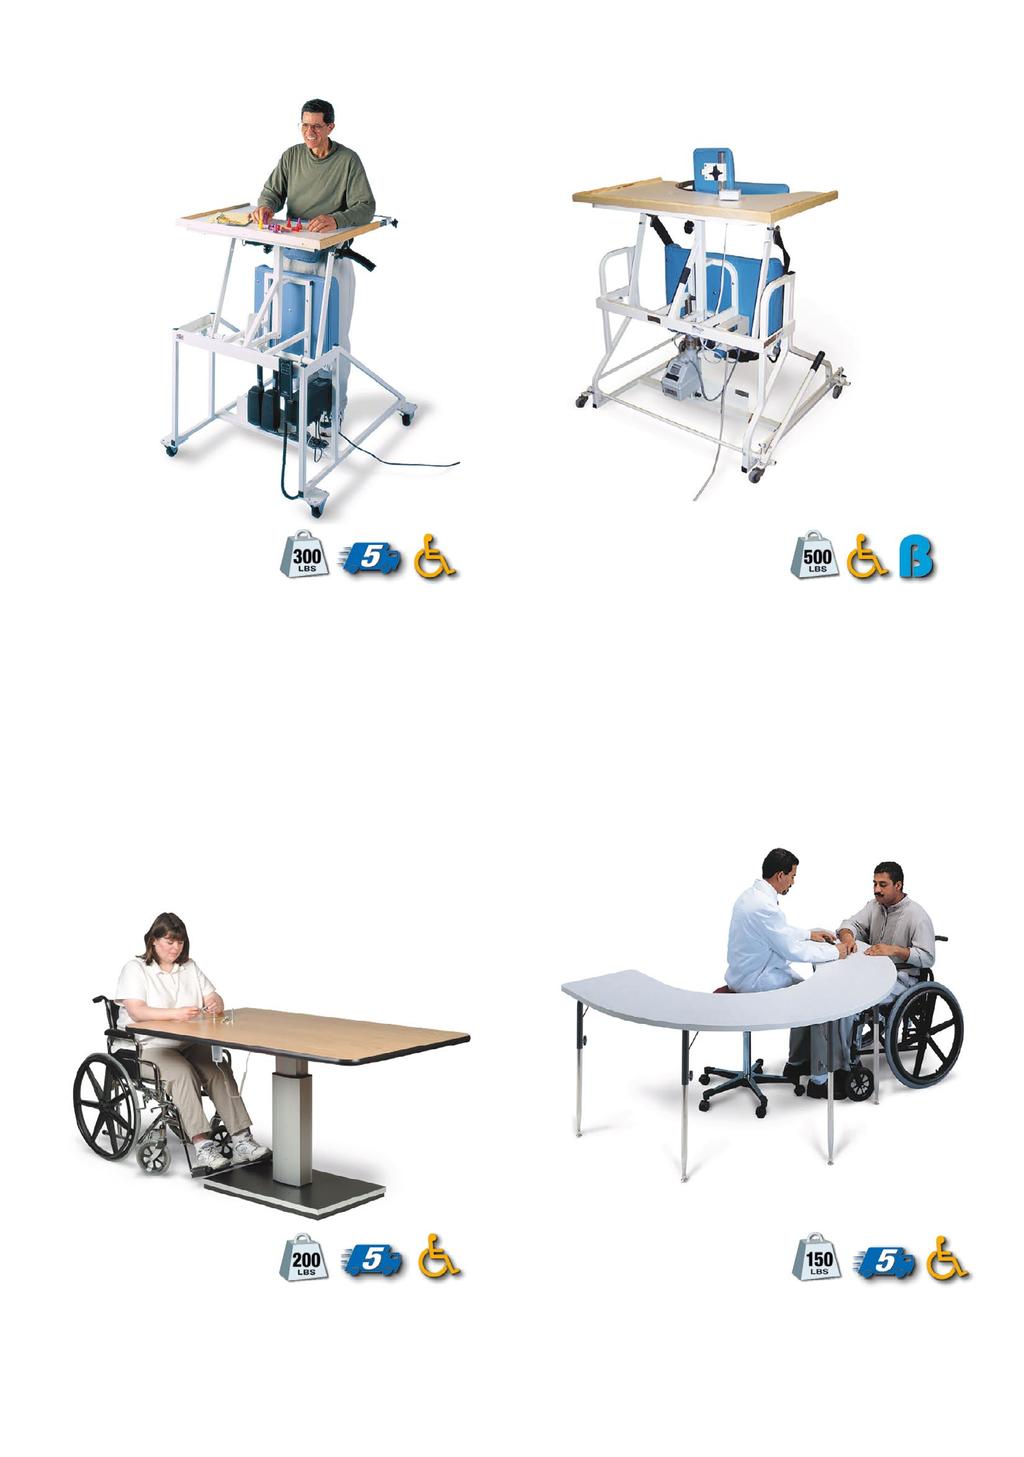 STAND-IN TABLES/THERAPY TABLES A. Model 6175 B. Model 6185 A. Model 6175 Hi-Lo Econo-Line Stand-In Table with Electric Patient Lift Motorized patient lift from sitting to standing position.